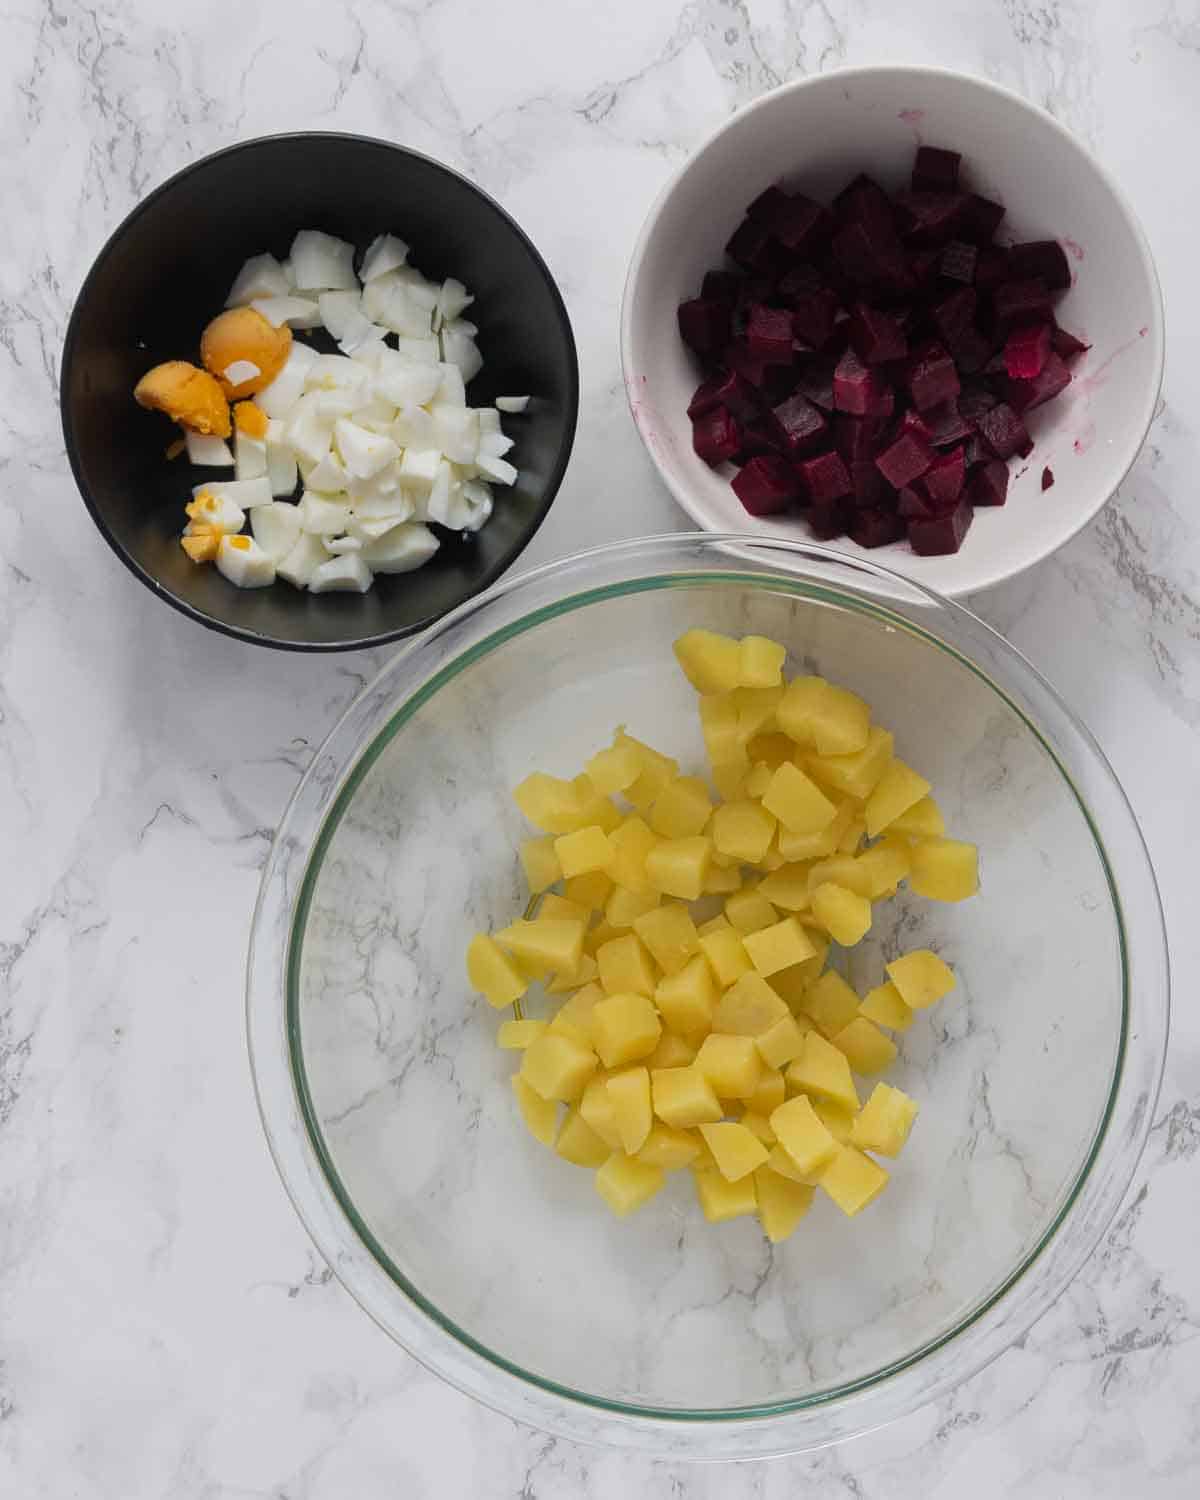 Three bowls, one with chopped beets, chopped eggs, and chopped potatoes.